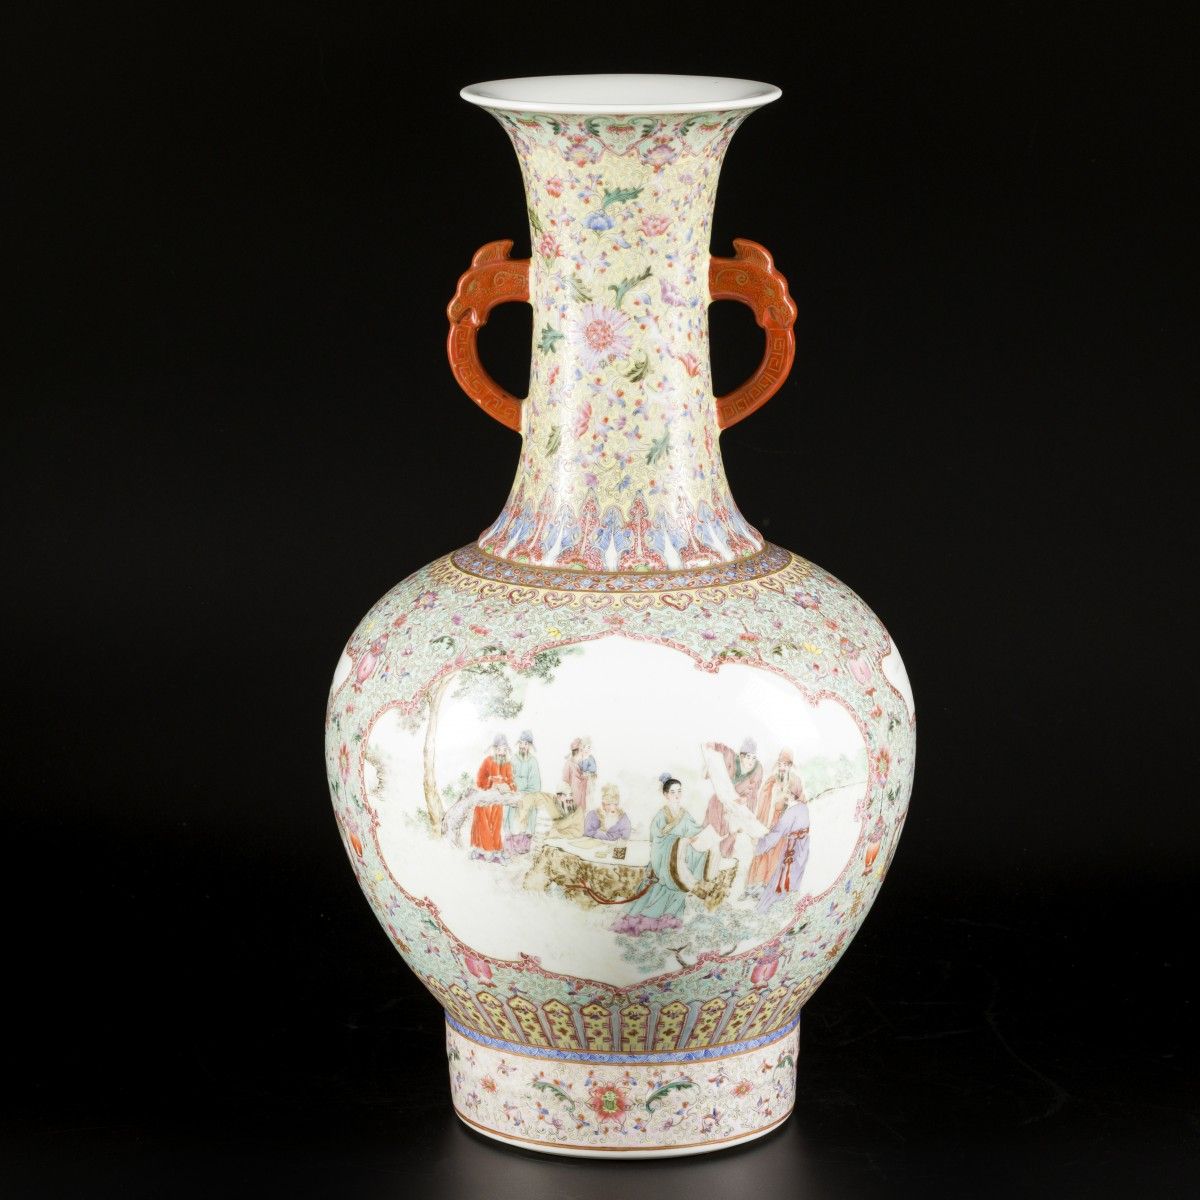 A porcelain famille rose vase with figures in a garden, marked Qianglong, China,&hellip;